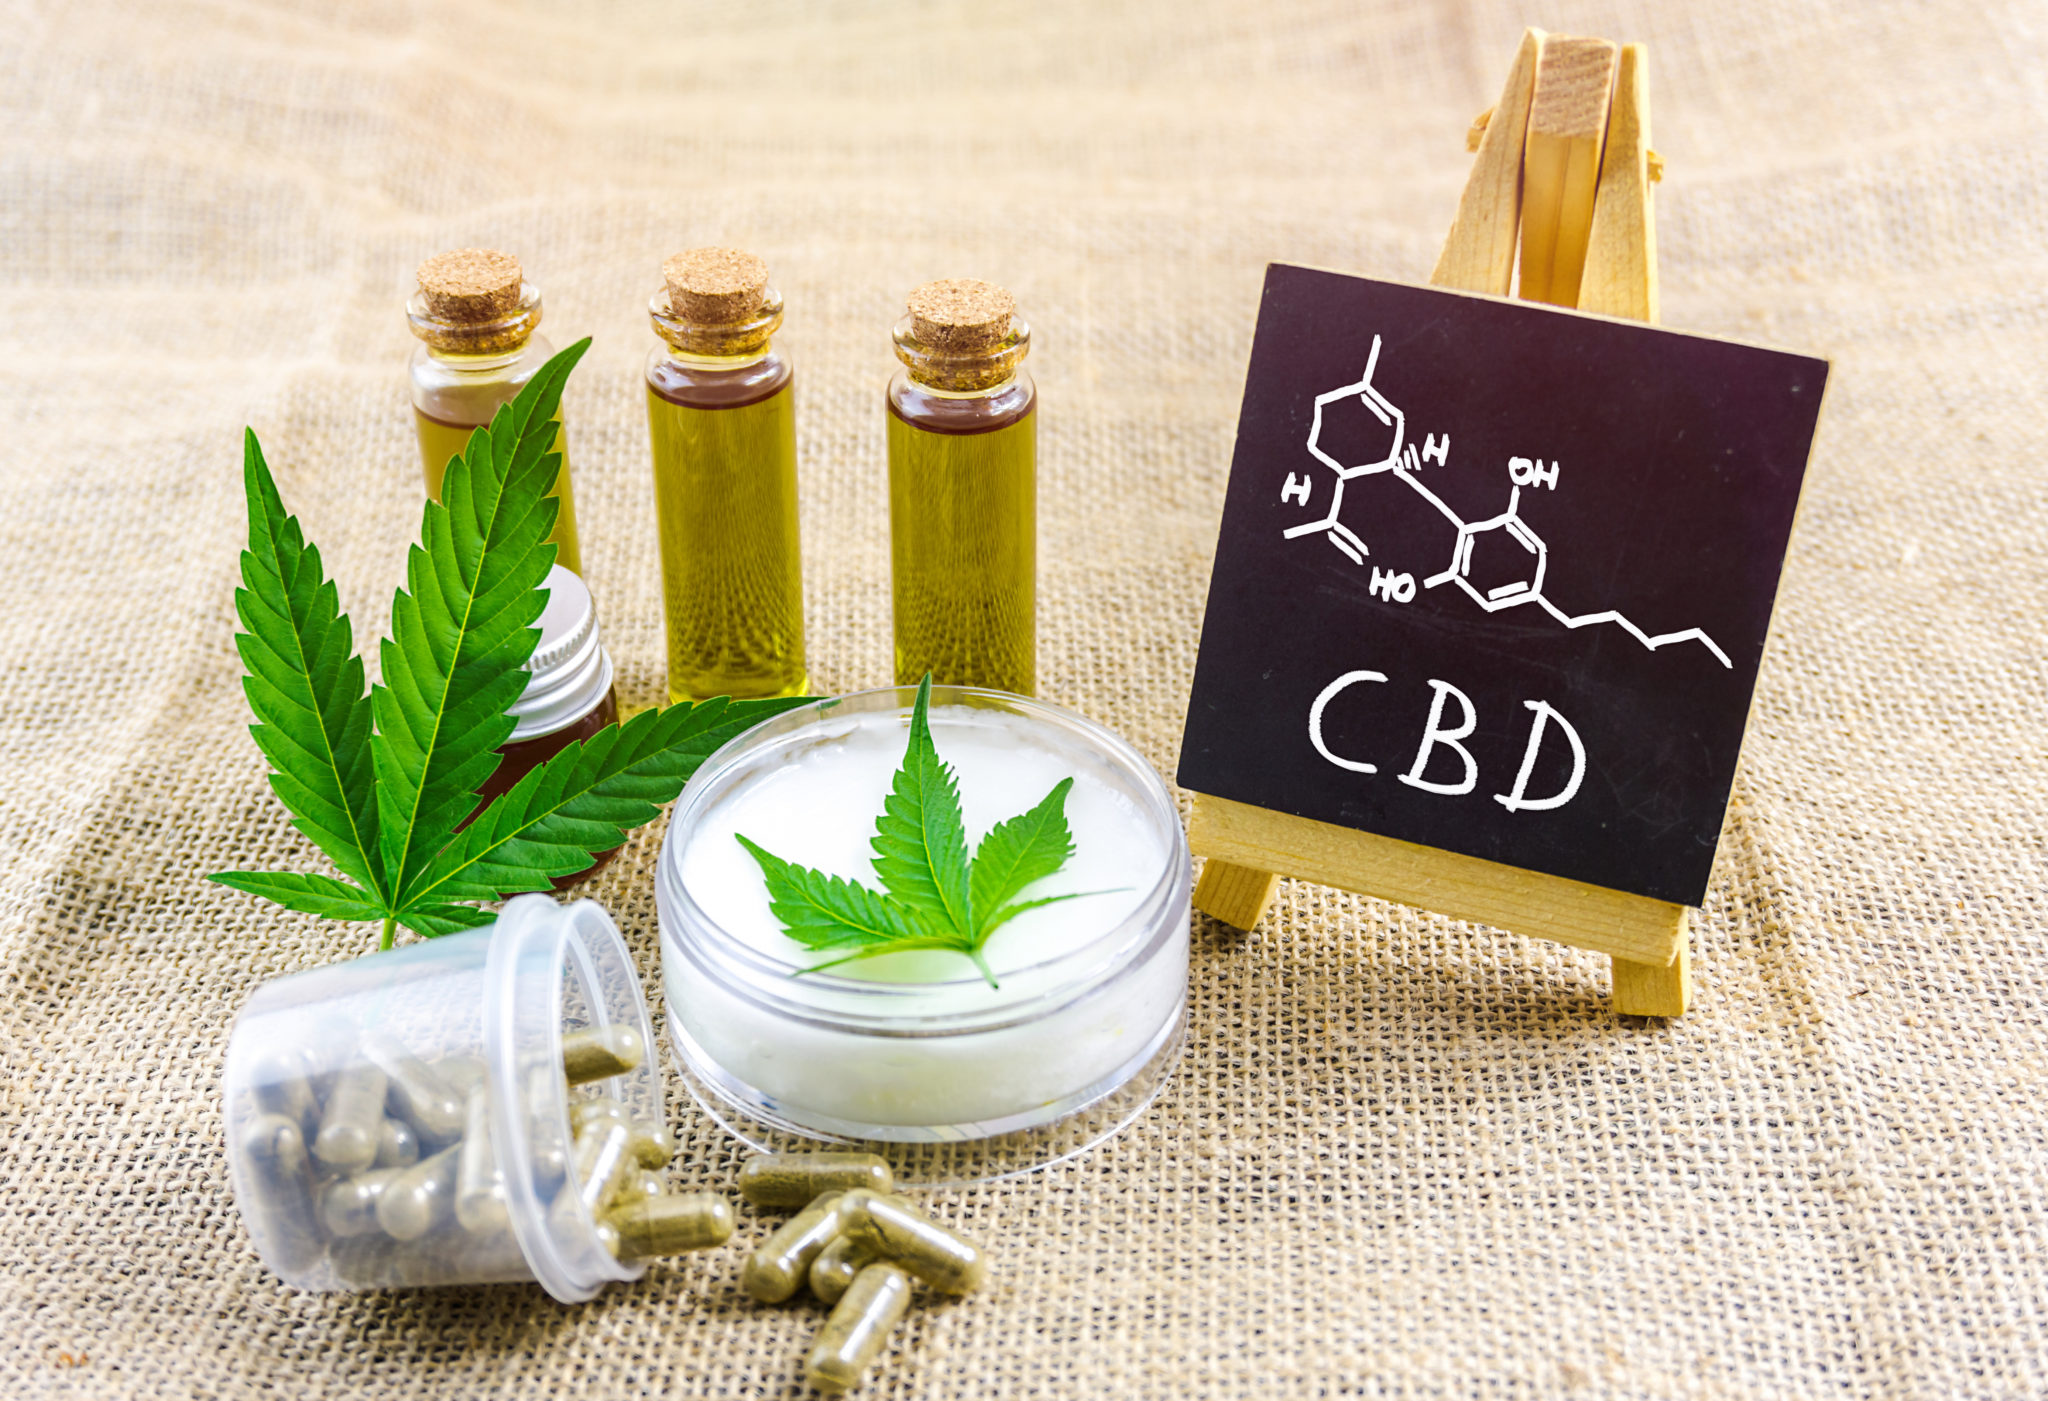 What Are The Parts of a CBD?